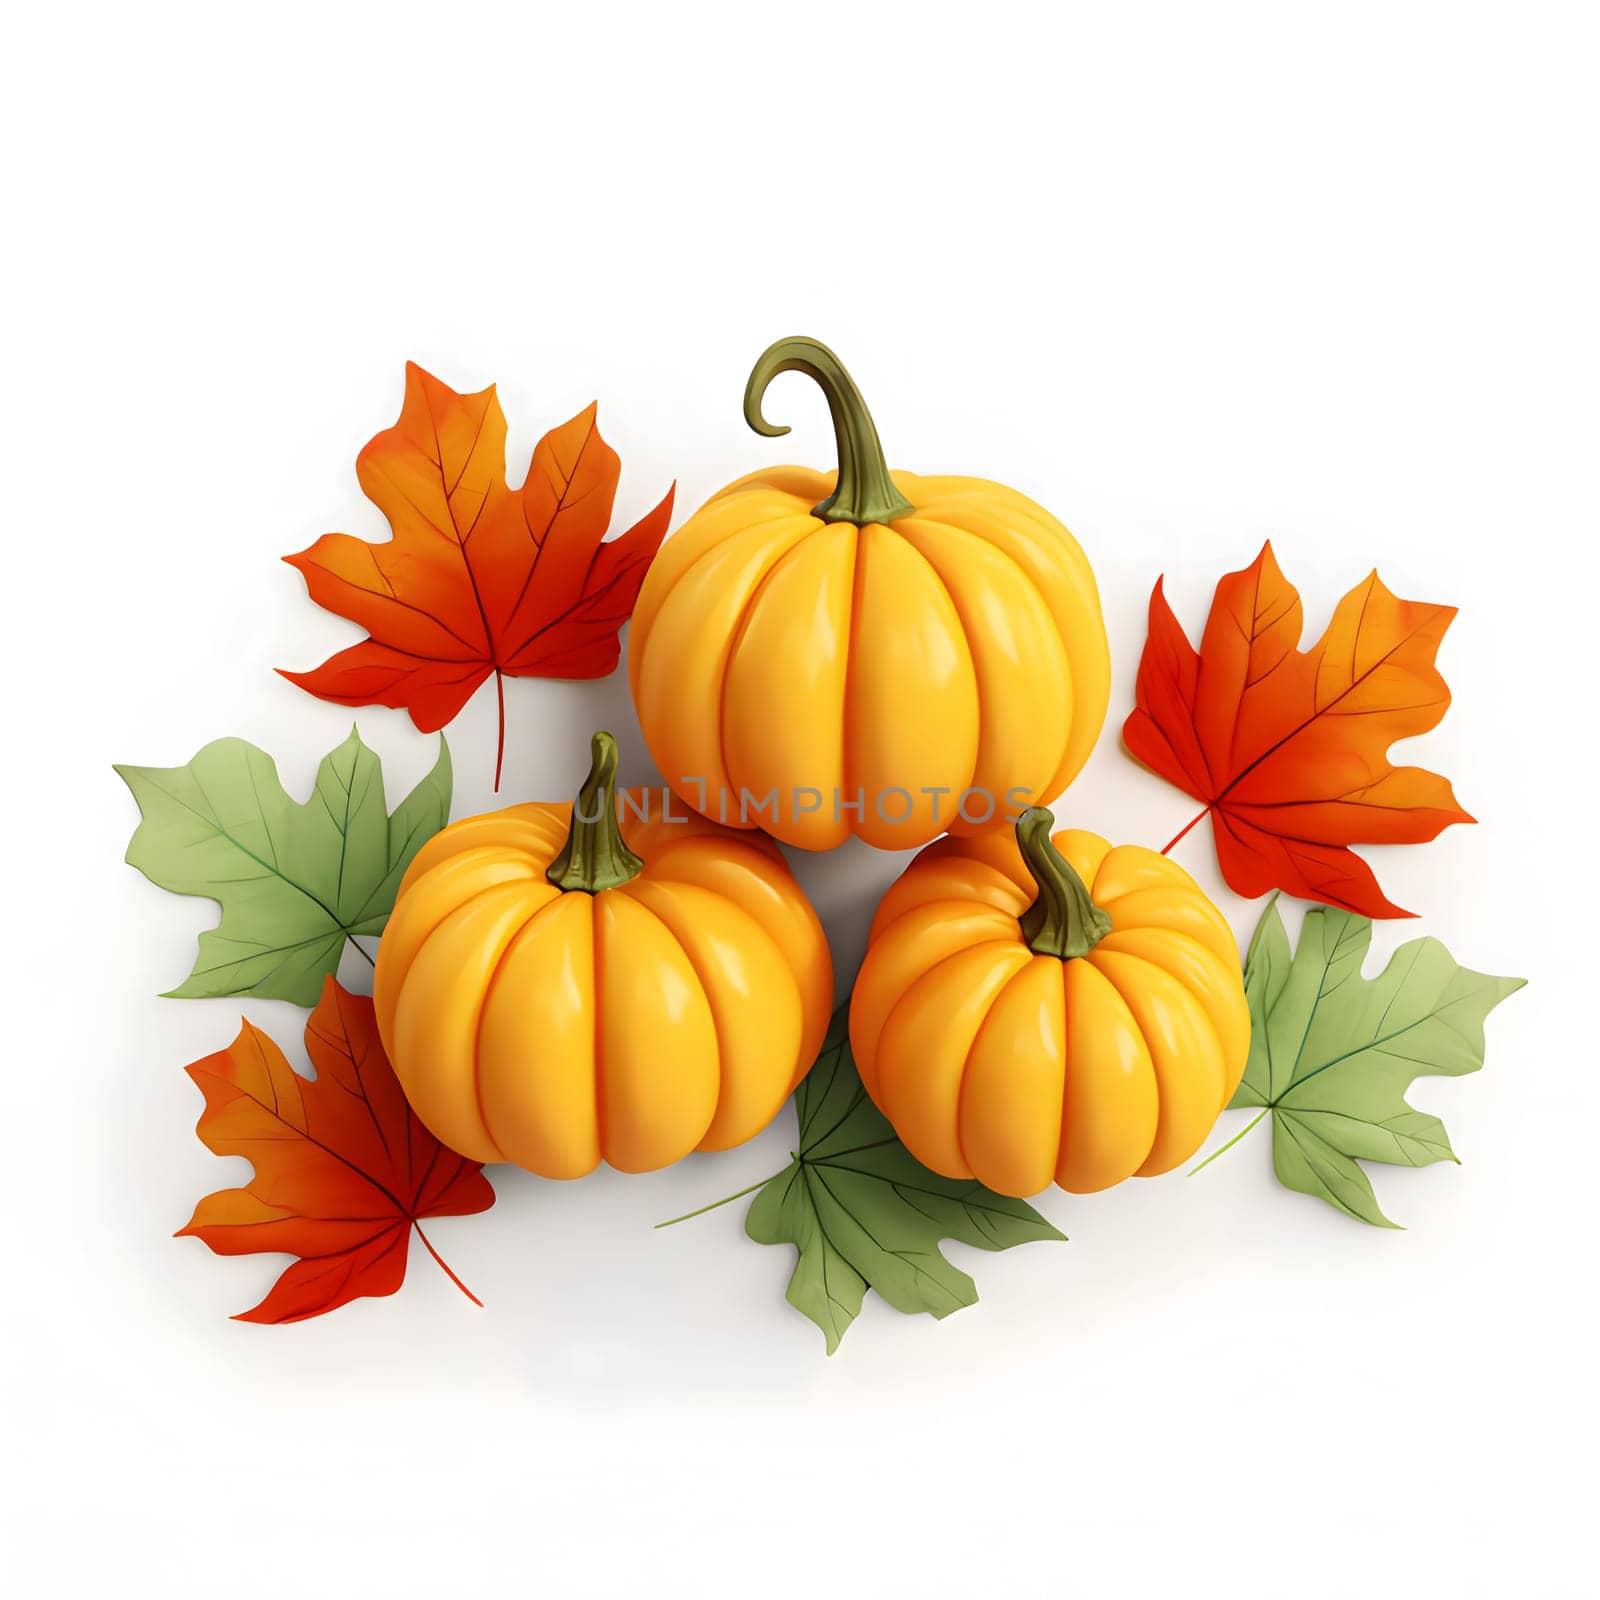 Three pumpkins and autumn leaves, Halloween image on a white isolated background. by ThemesS